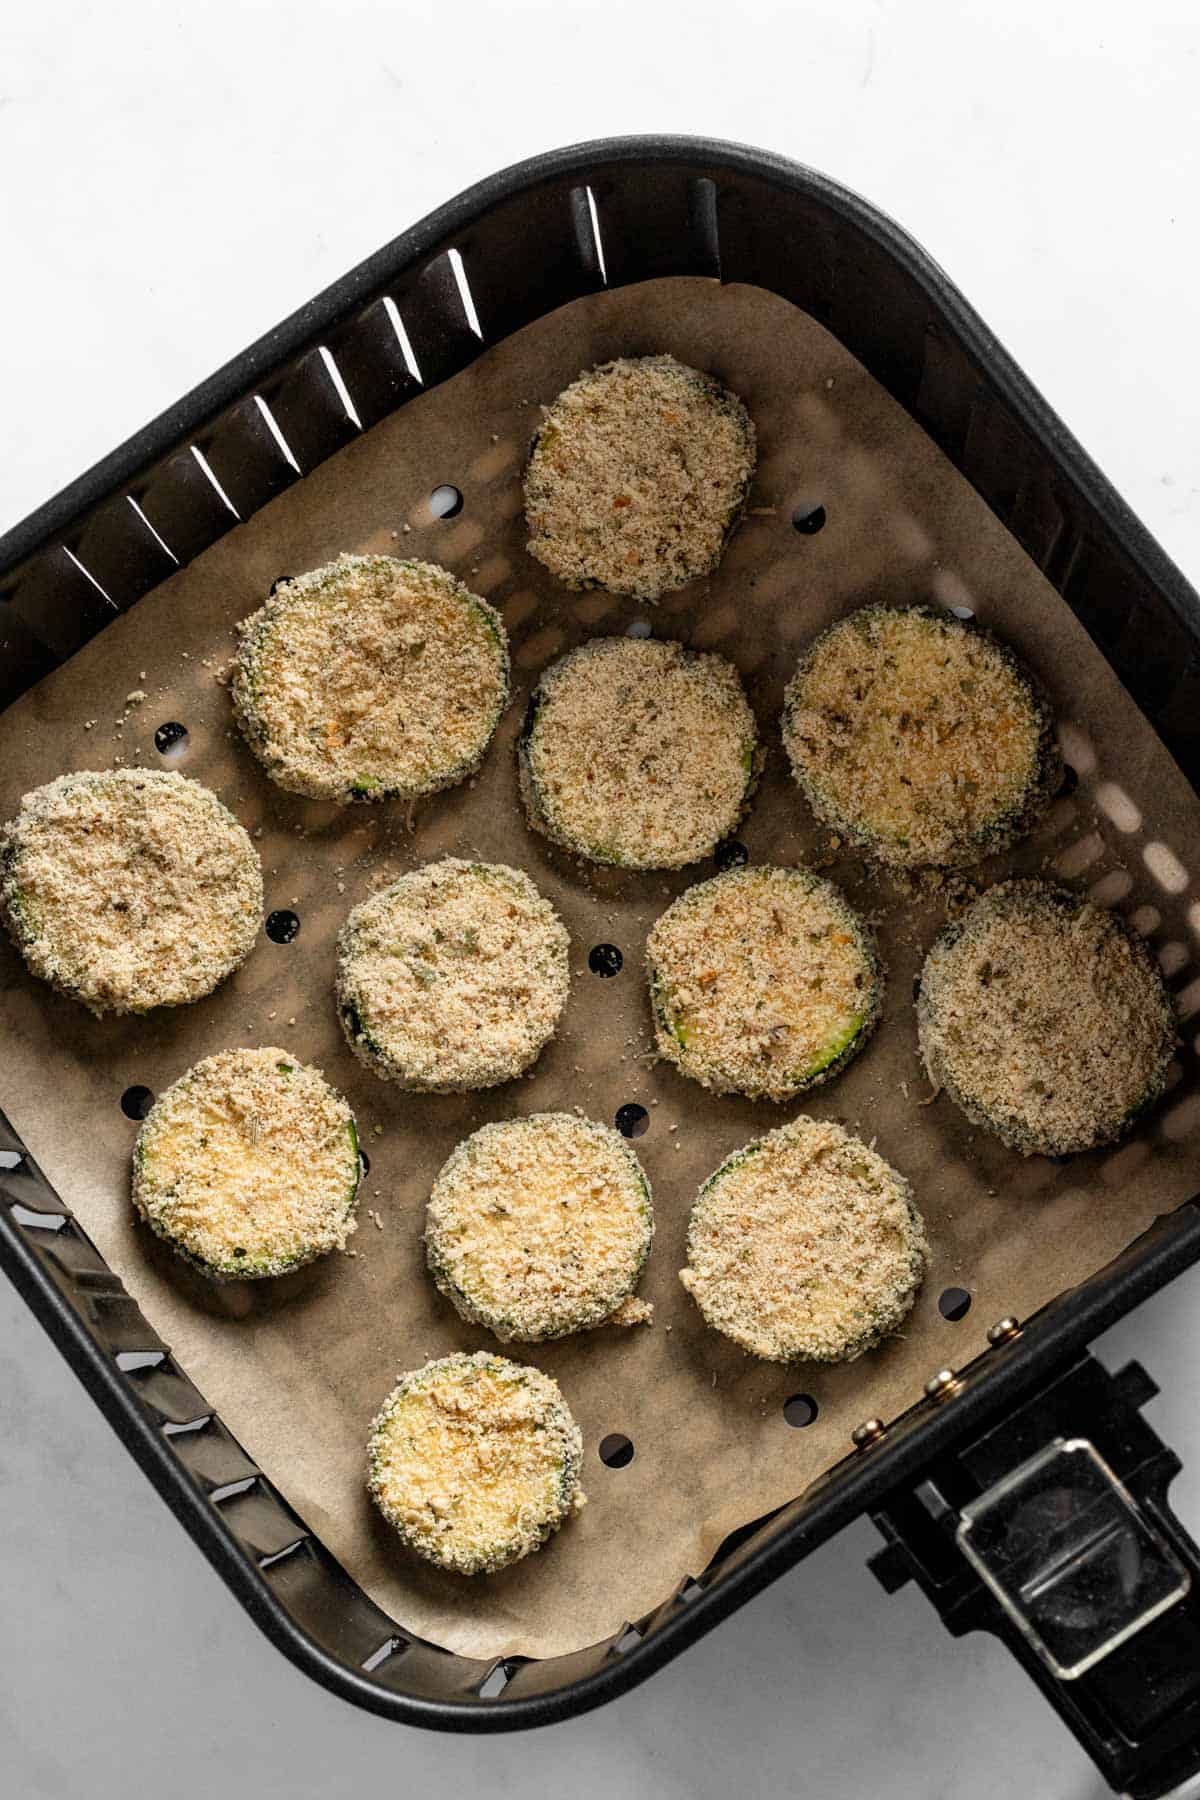 zucchini slices in parmesan and breadcrumb coating in a air fryer basket.